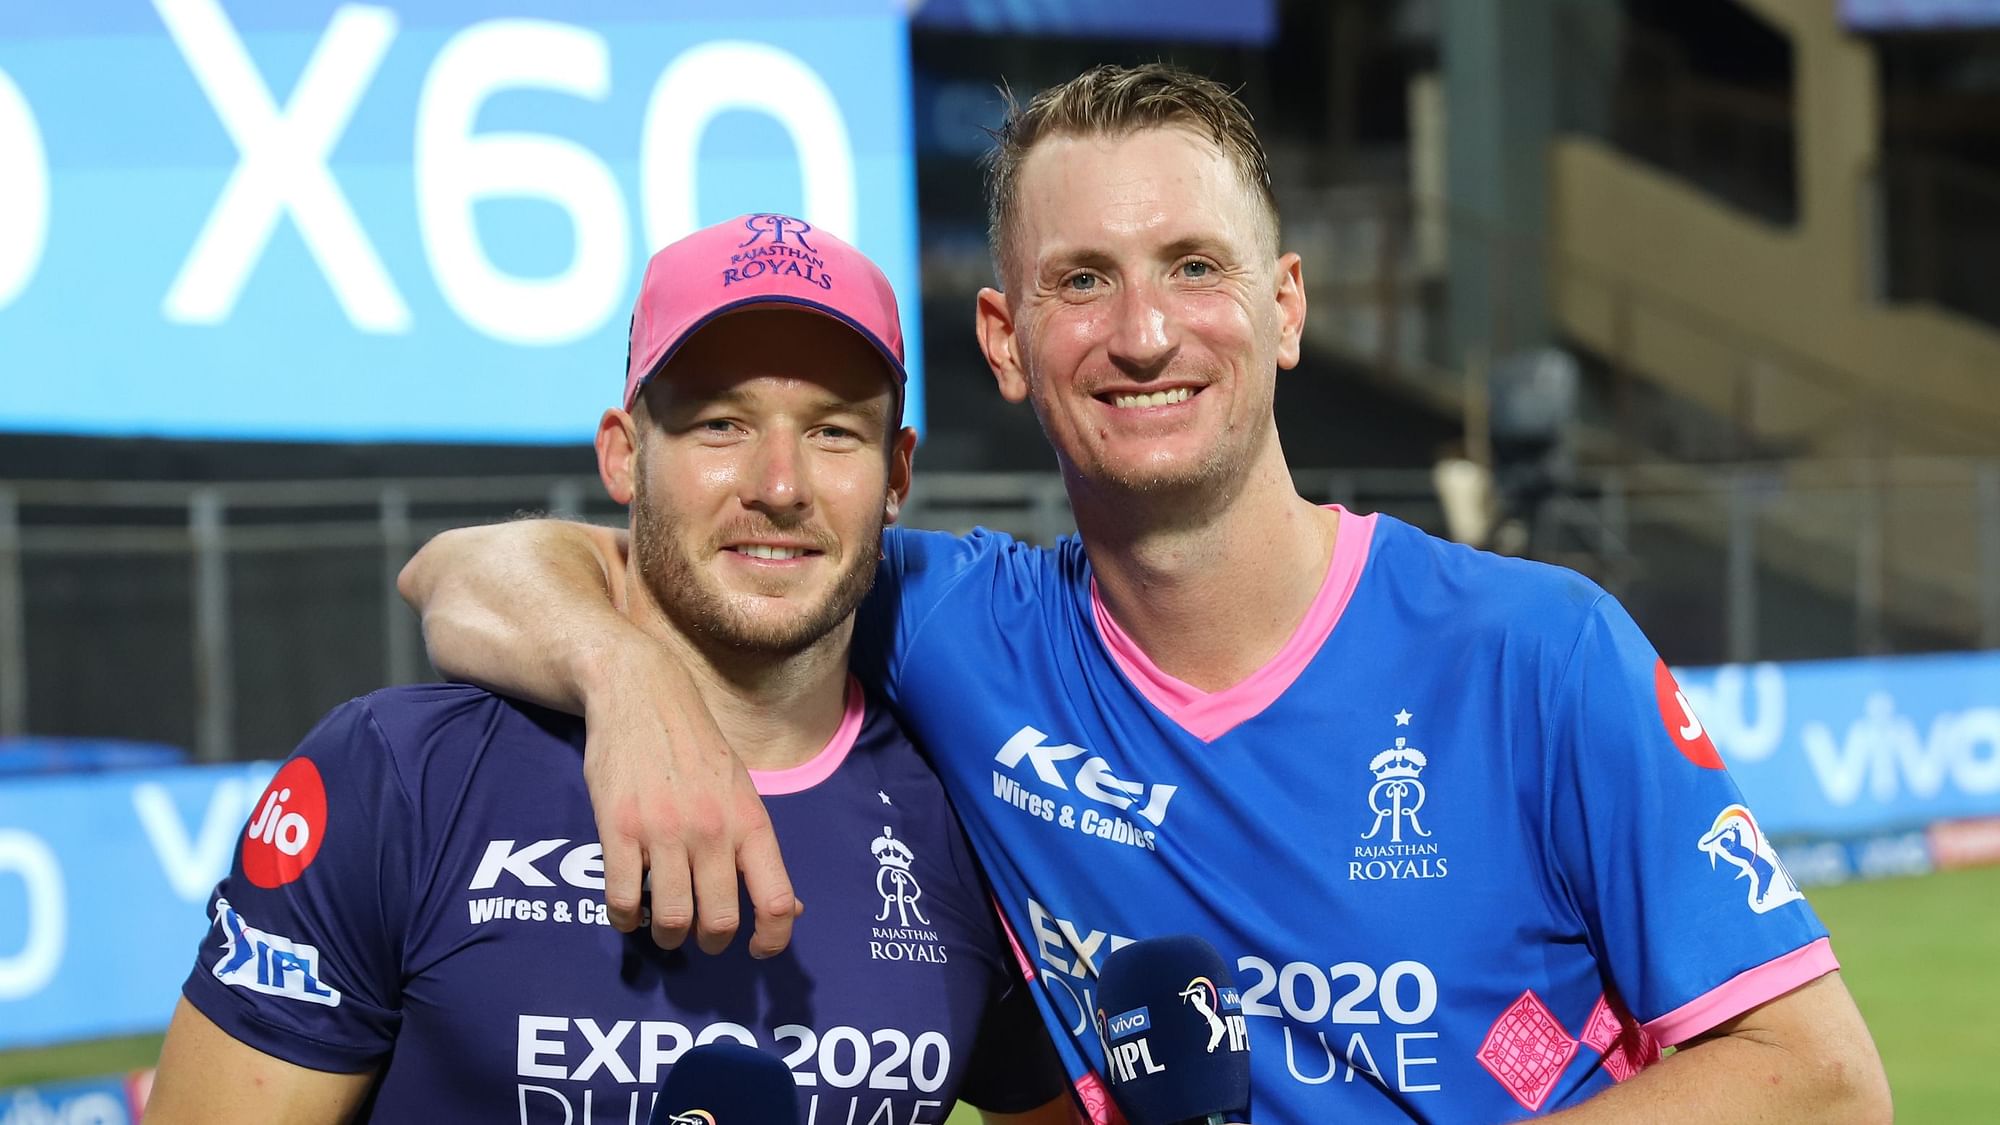 After the victory over Delhi Capitals on Thursday, Chris Morris was asked about the Sanju Samson run refused in RR’s season-opener.